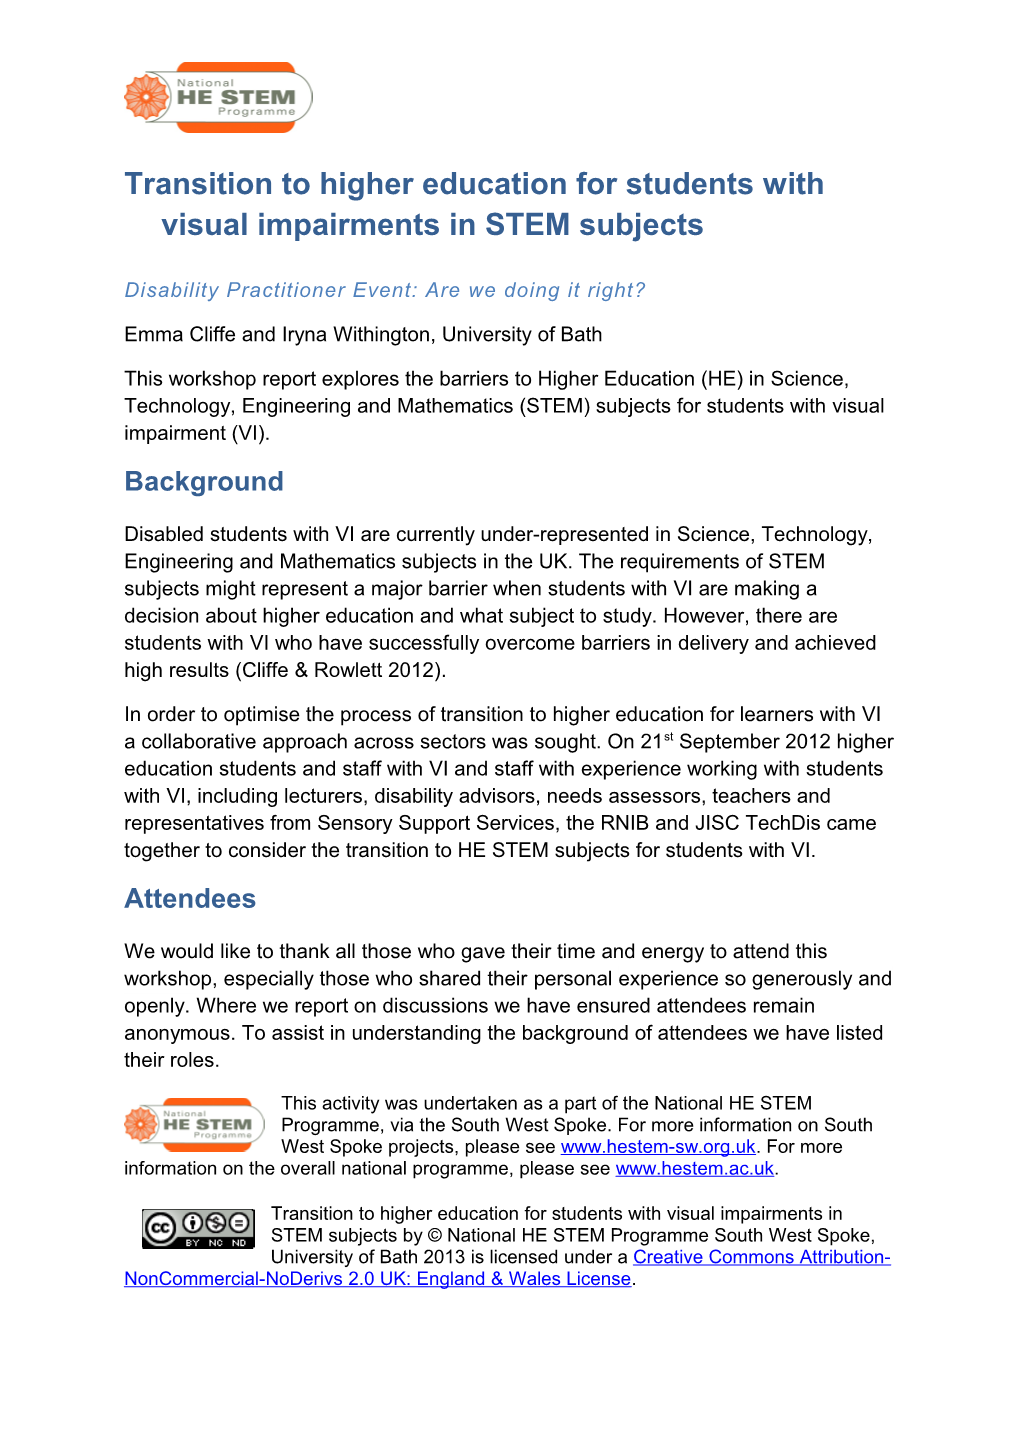 Transition to Higher Education for Students with Visual Impairments in STEM Subjects